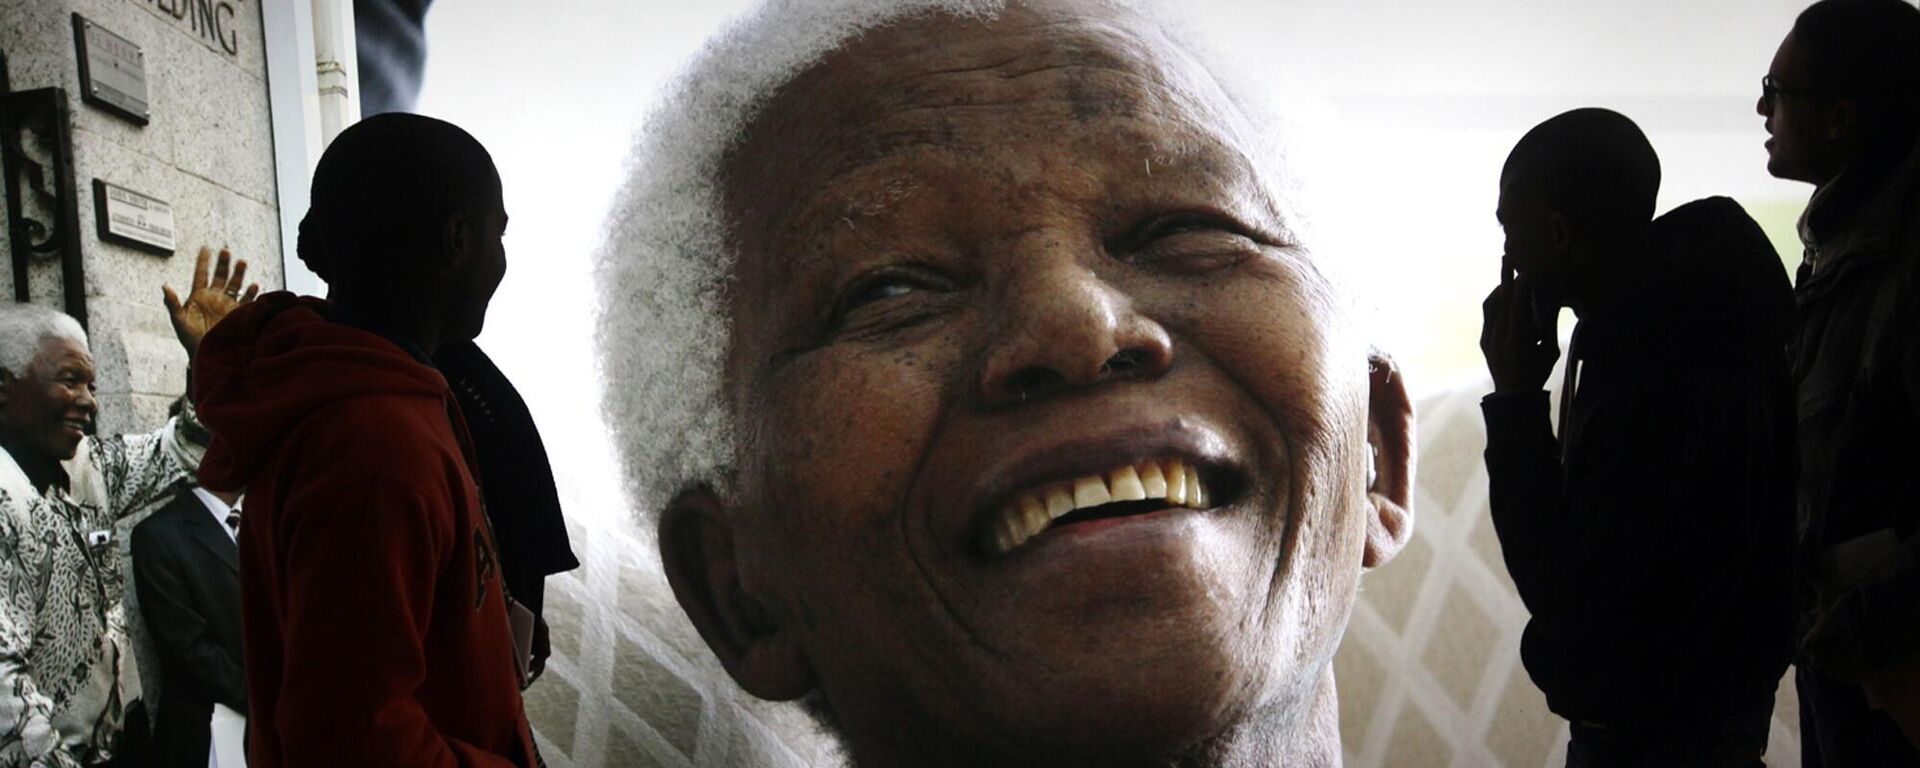 Large photographs of former South African President Nelson Mandela are displayed at the Nelson Mandela Legacy Exhibition at the Civic Centre in Cape Town, South Africa. - Sputnik Africa, 1920, 18.07.2023